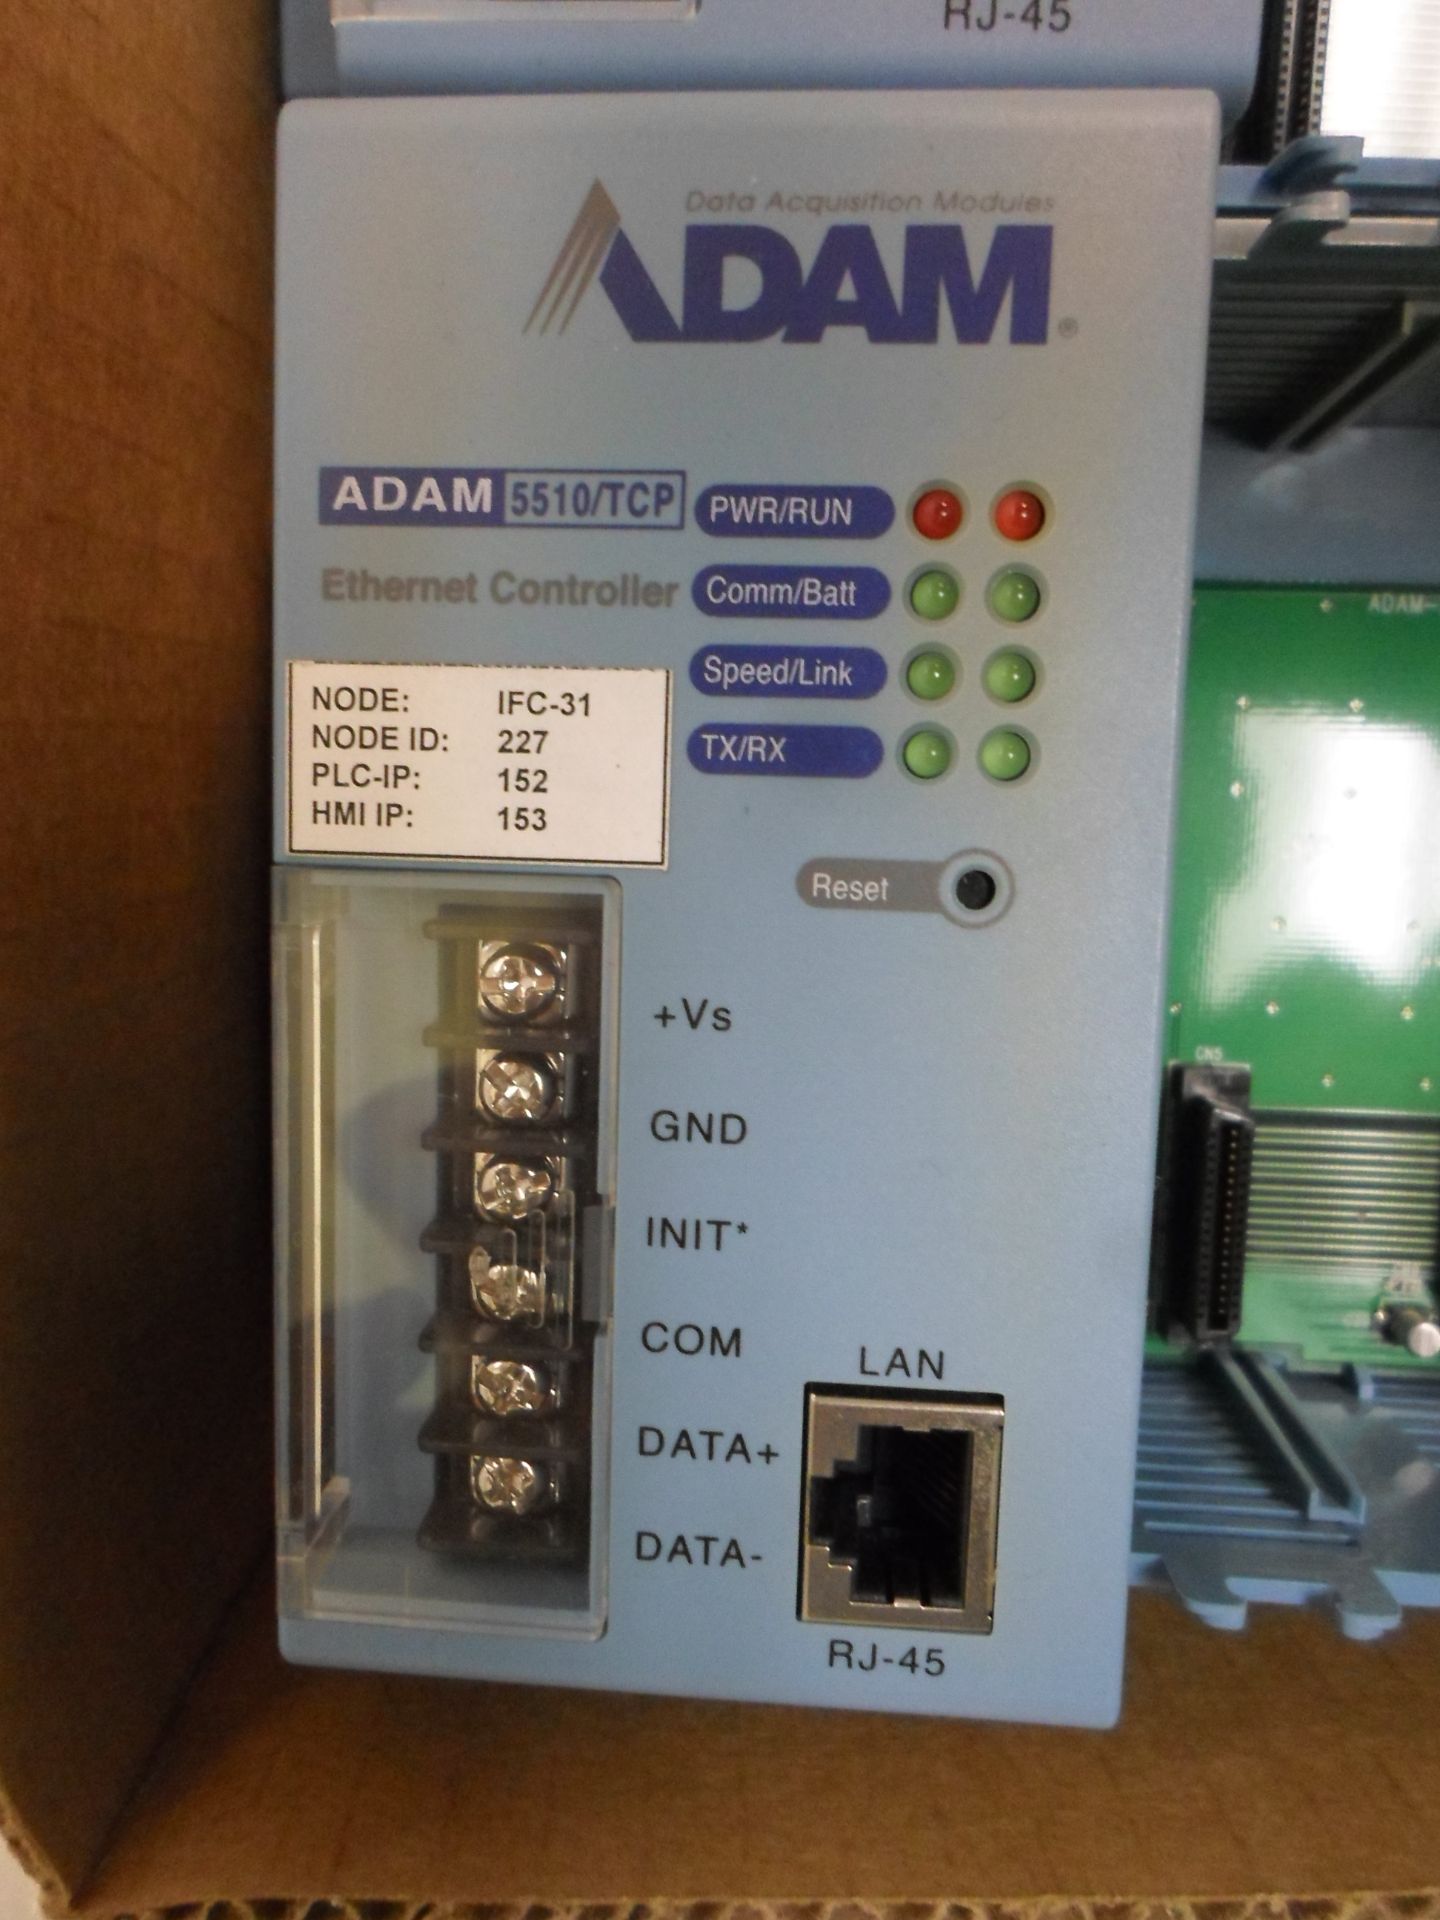 LOT OF TWO ADAM 5510/TCP ICF-31 ETHERNET CONTROLLER - Image 3 of 3